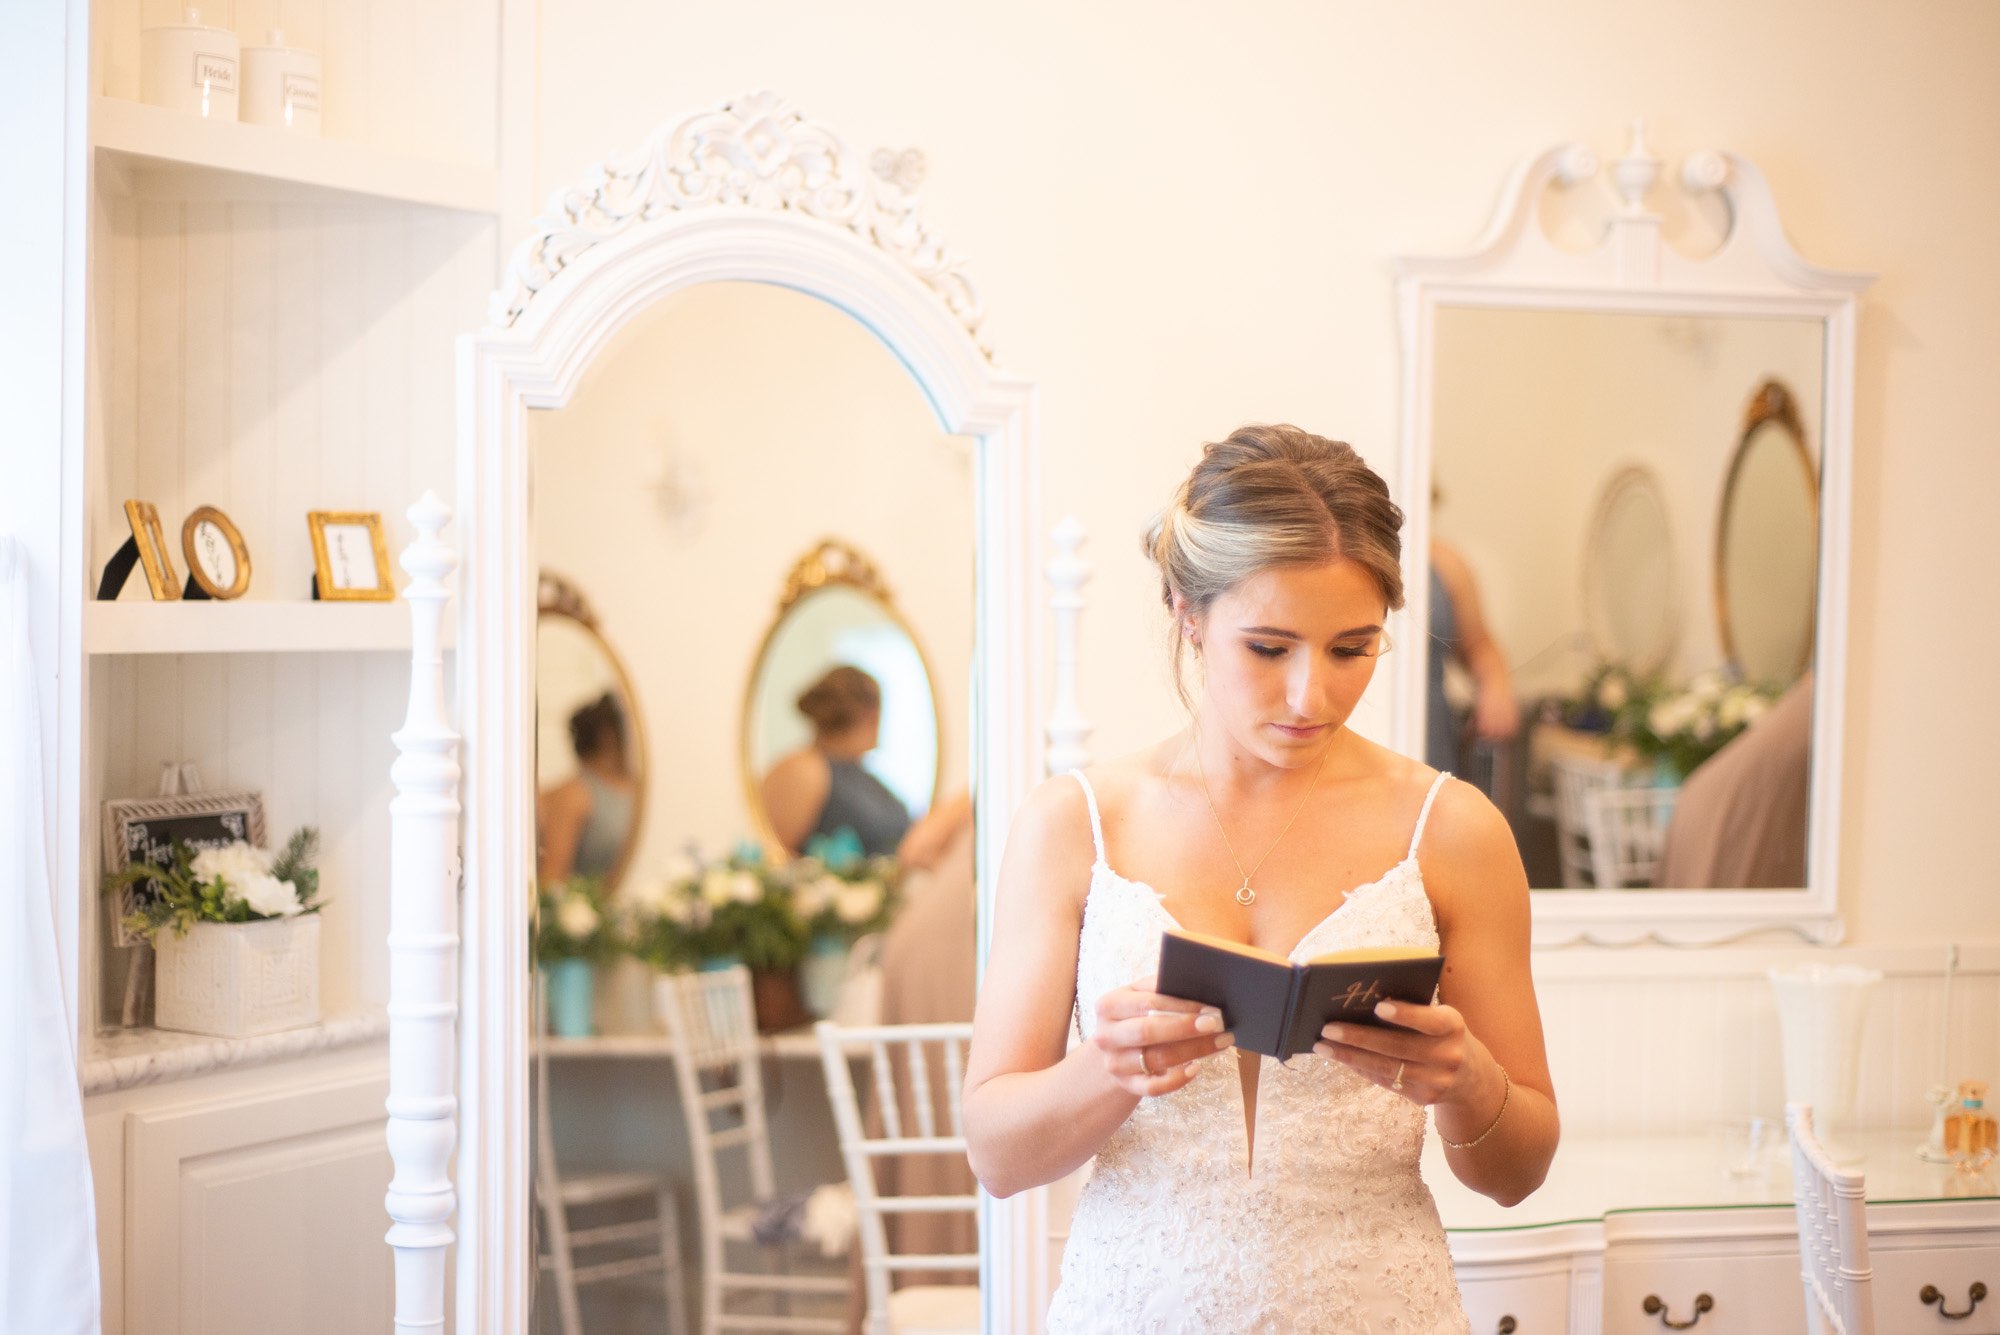 Bride reading a special message from her groom as she gets ready for the wedding.